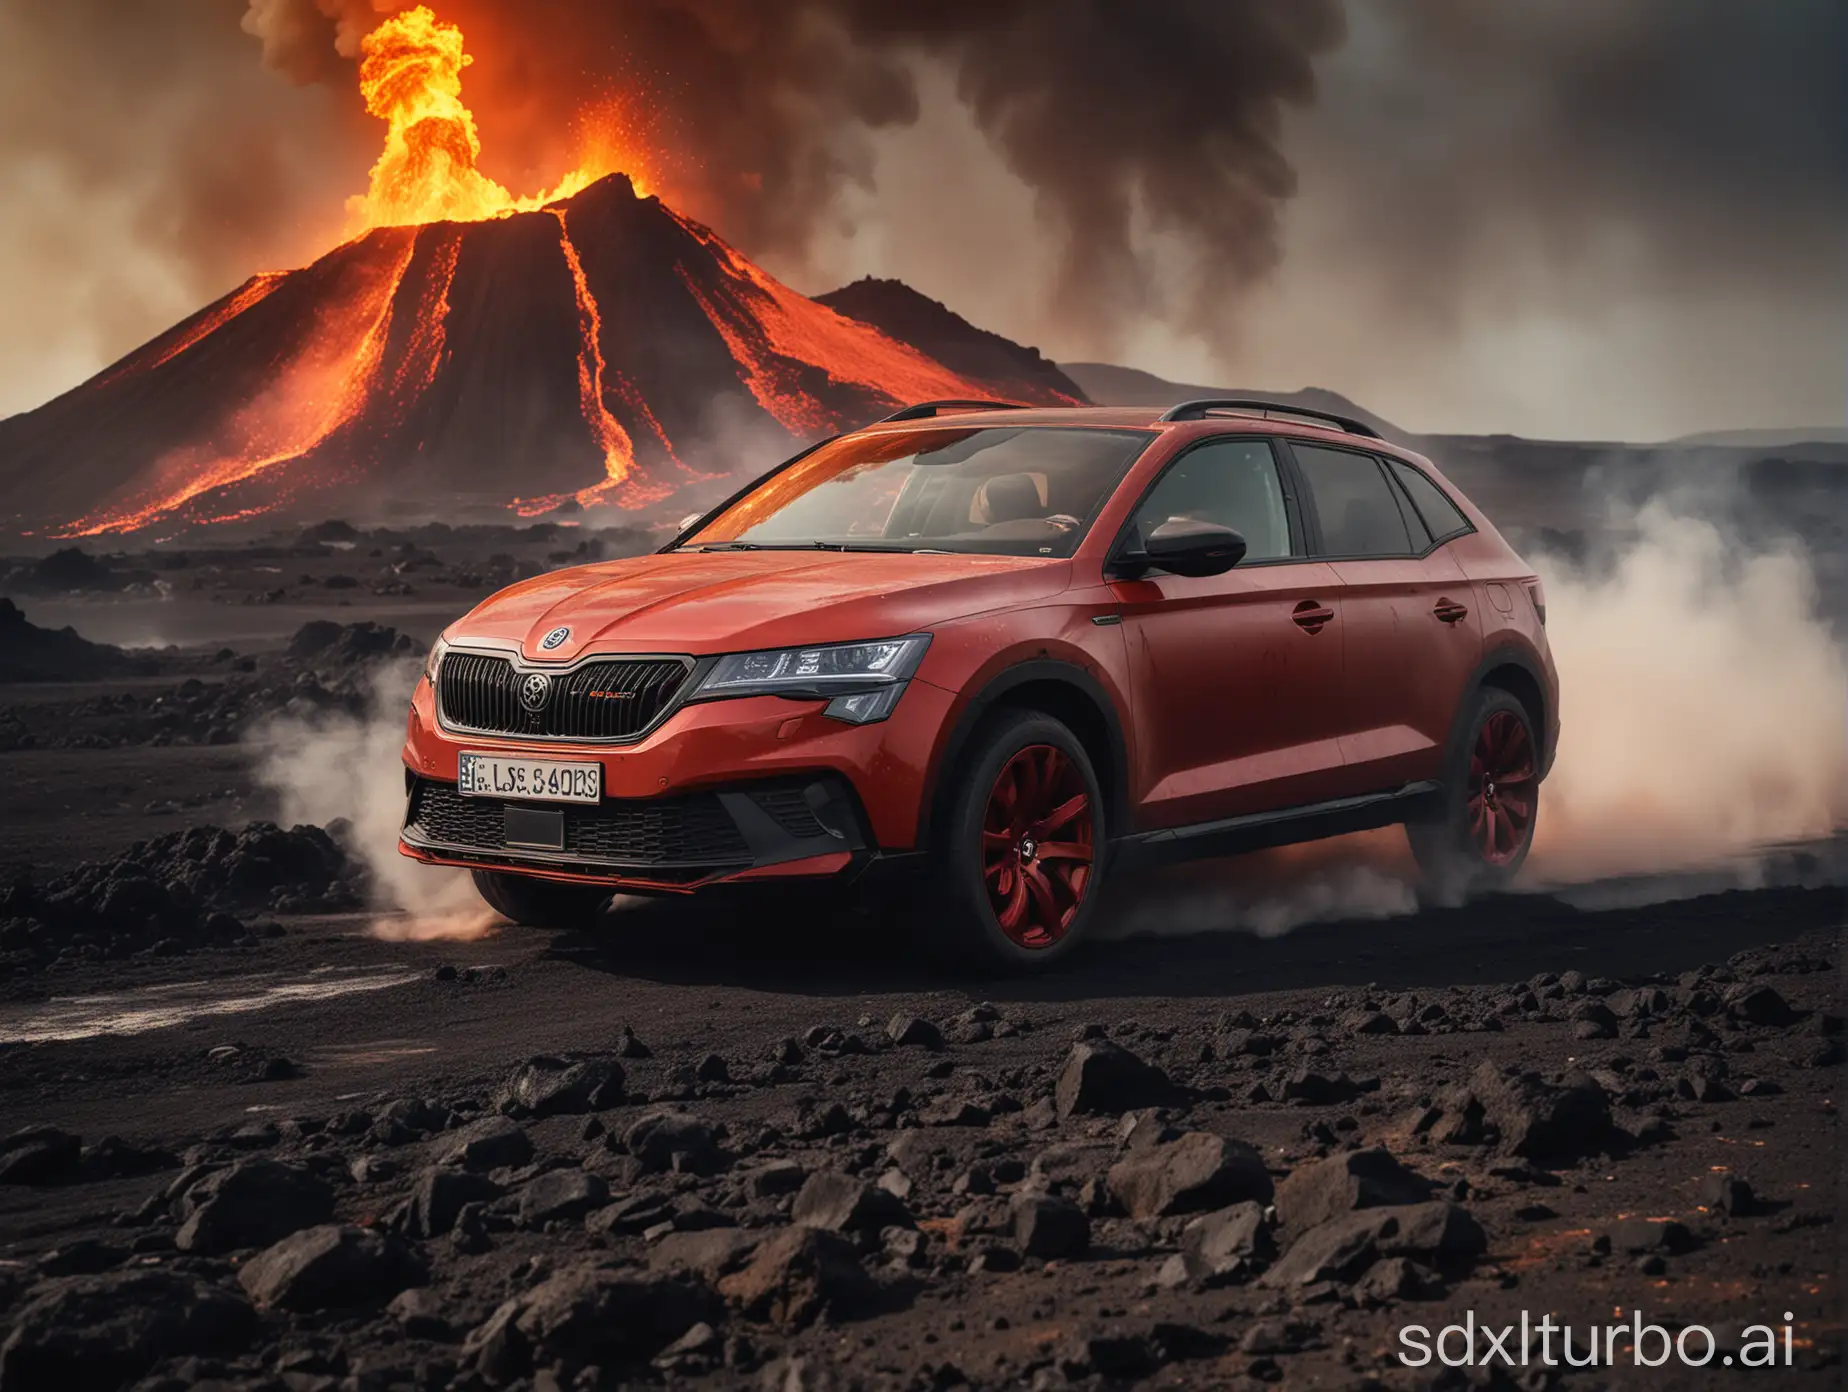 A professional front portrait photograph of a Skoda Camiq vehicle driving over a hot lava field. Extensive smoke is coming from the lava, and there is a volcano in the distant background. The car has a matte dark red paint job and an offroad bumper. The shot has a bokeh effect. The wheels of the car are on fire.